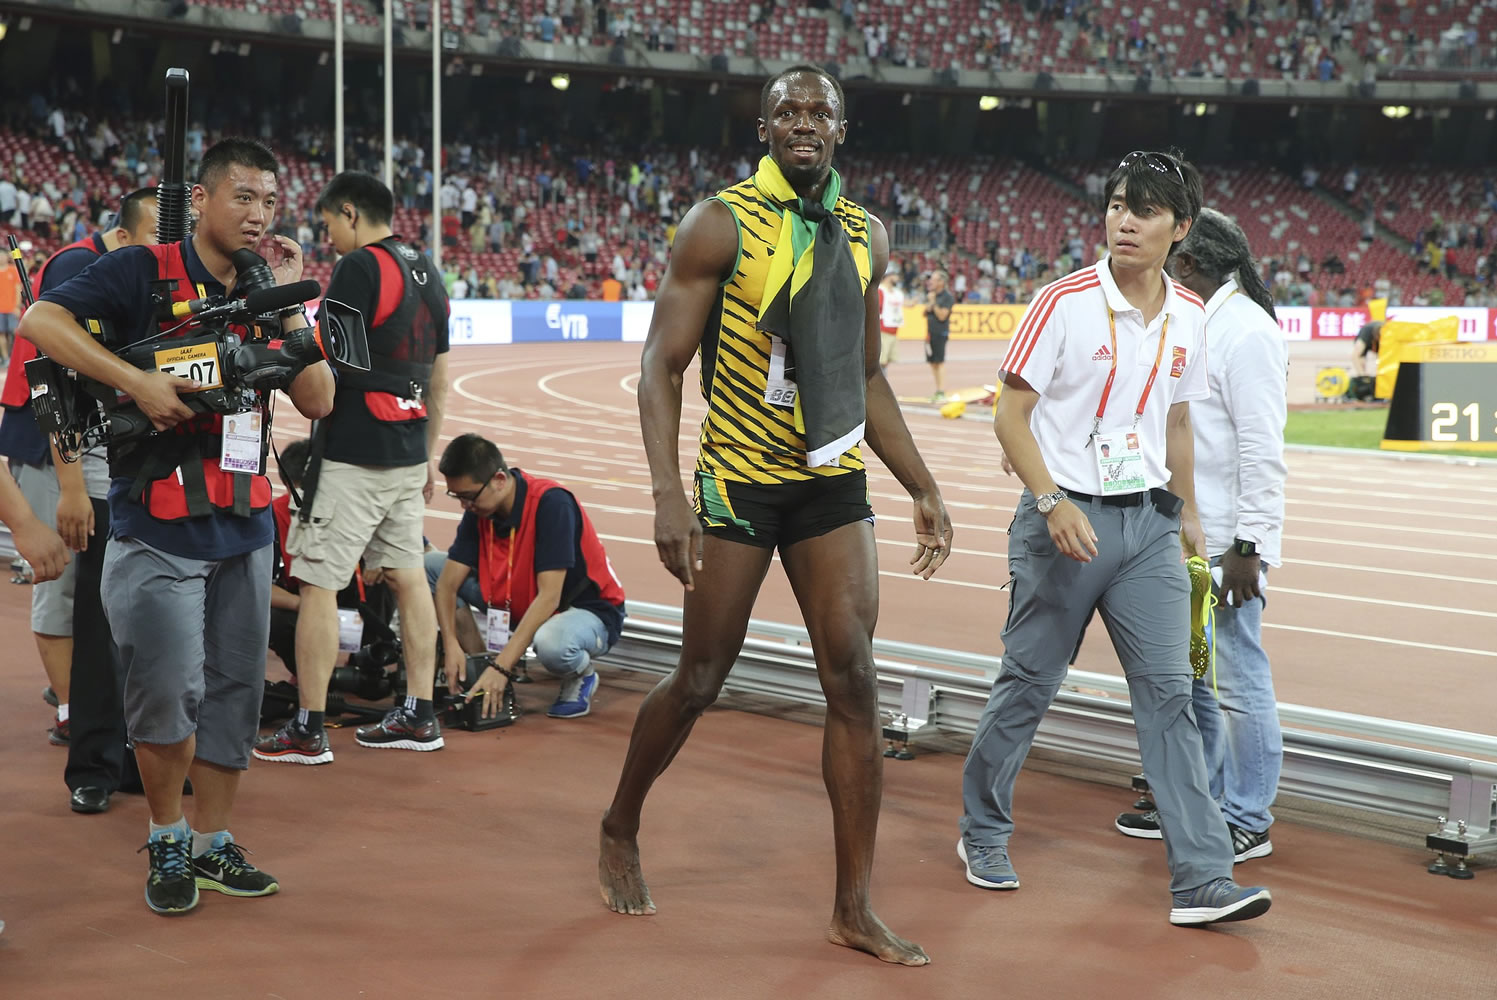 Jamaica's Usain Bolt walks away after being hit by a videographer on a Segway as he celebrated winning the men's 200-meter final at the World Athletics Championships at the Bird's Nest stadium in Beijing, Thursday, Aug. 27, 2015.